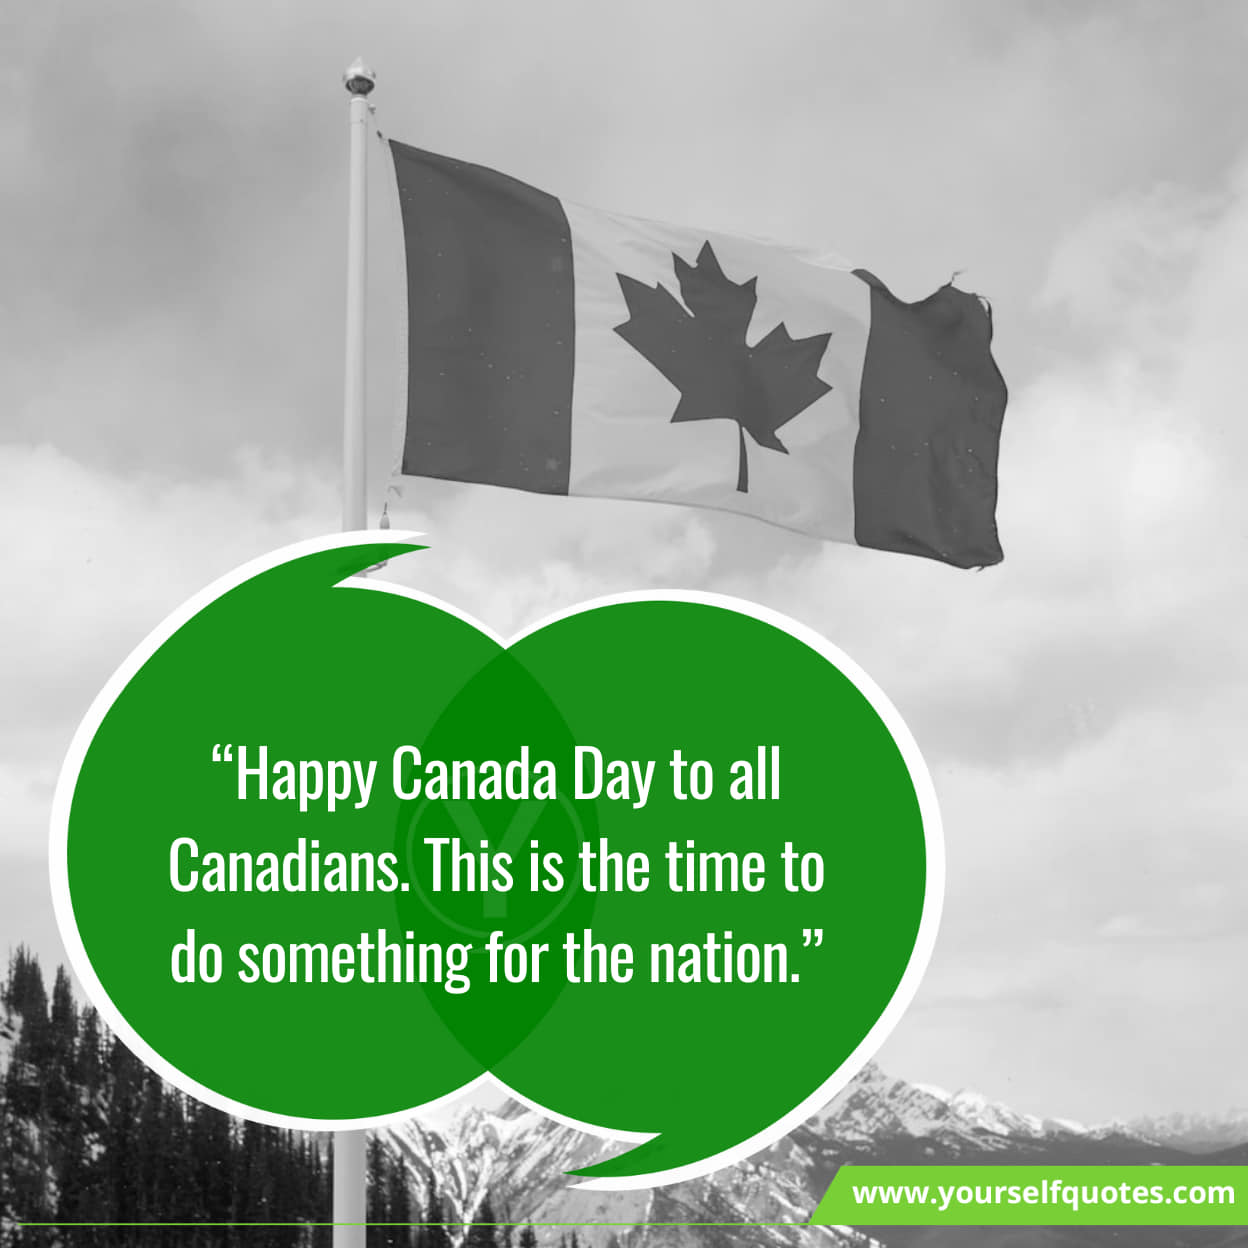 Best wishes for National Canada Day